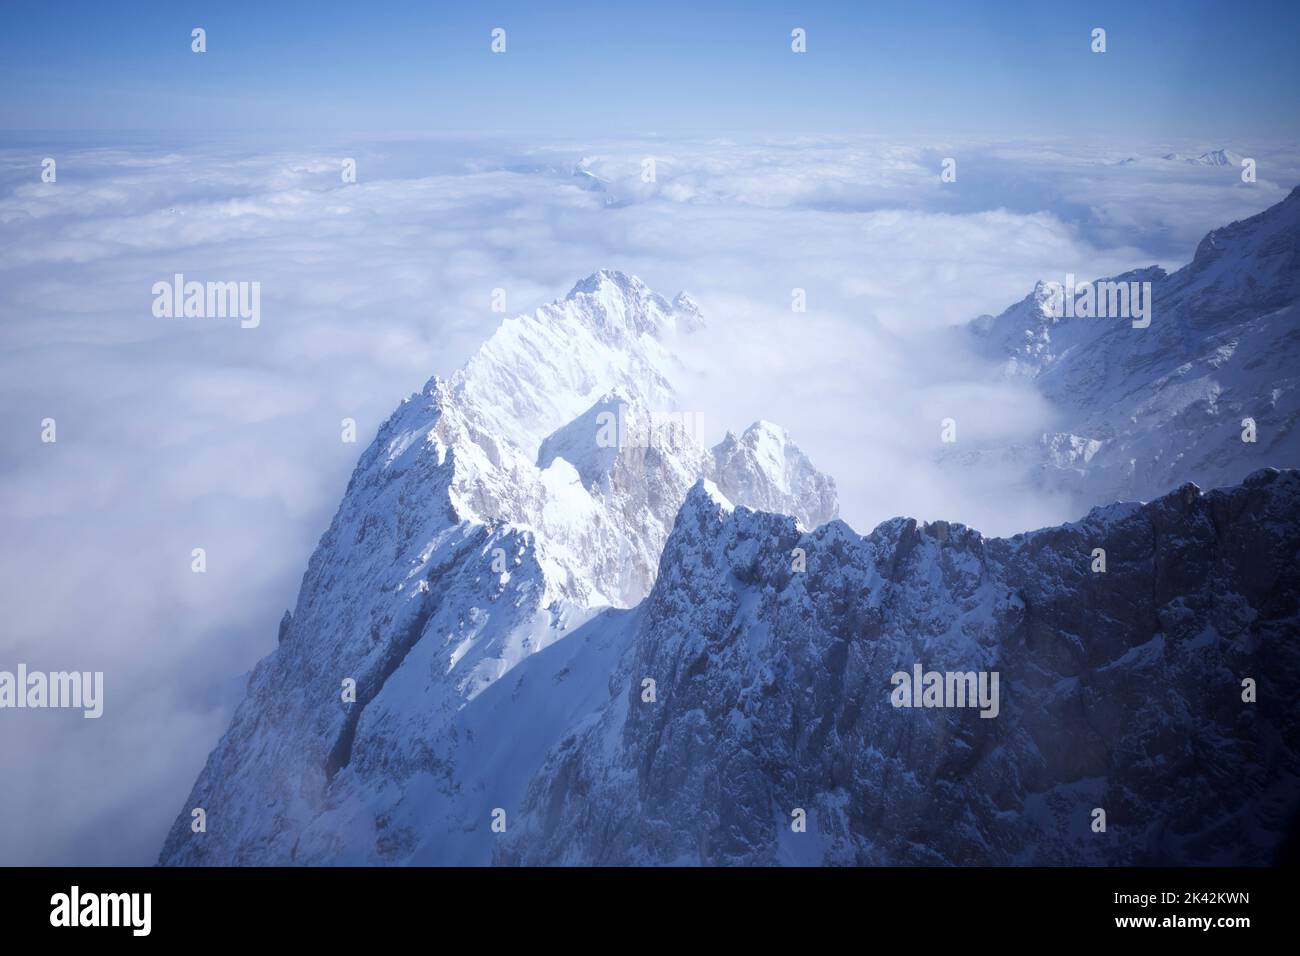 Zugspitze, the highest alps in southern Germany. The photo was taken from inside a cable car to the peak. Stock Photo